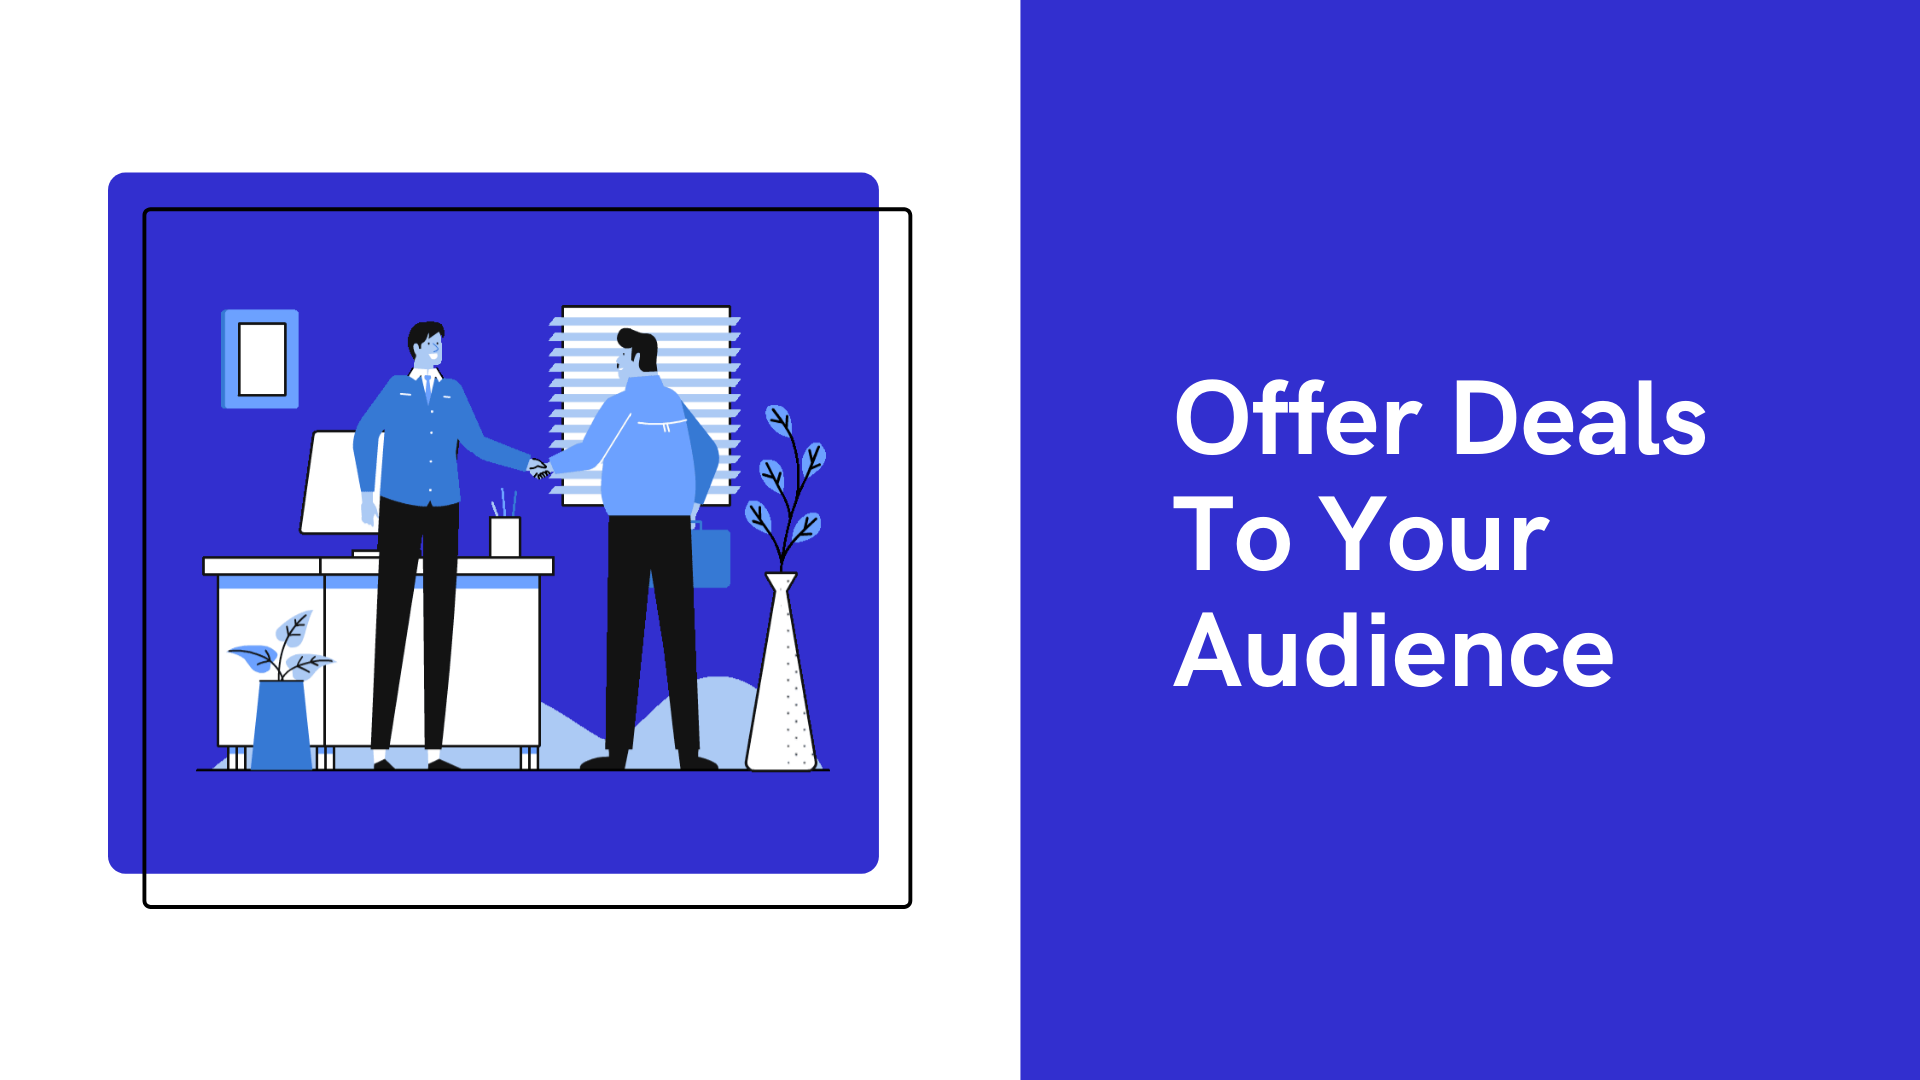 Offer deals to your audience